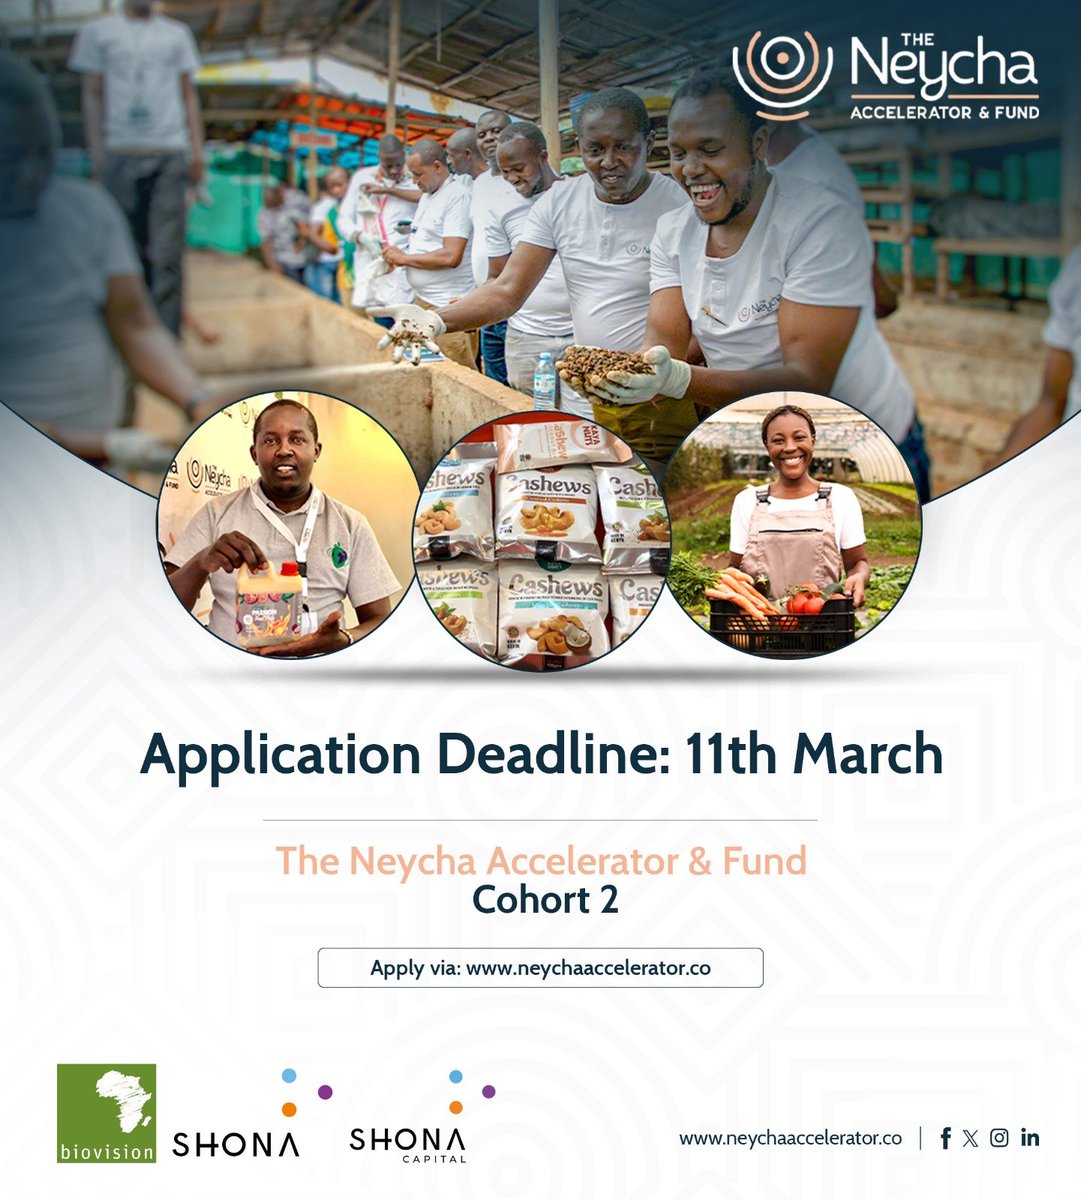 Don't miss the opportunity to be part of the 2nd cohort of @TheNeycha 

Agroecological enterprises in #Kenya and #Uganda can have access to capital, capacity building and networks.

Only 5 days left to apply!
#AgroecologyWorks #Agroecology